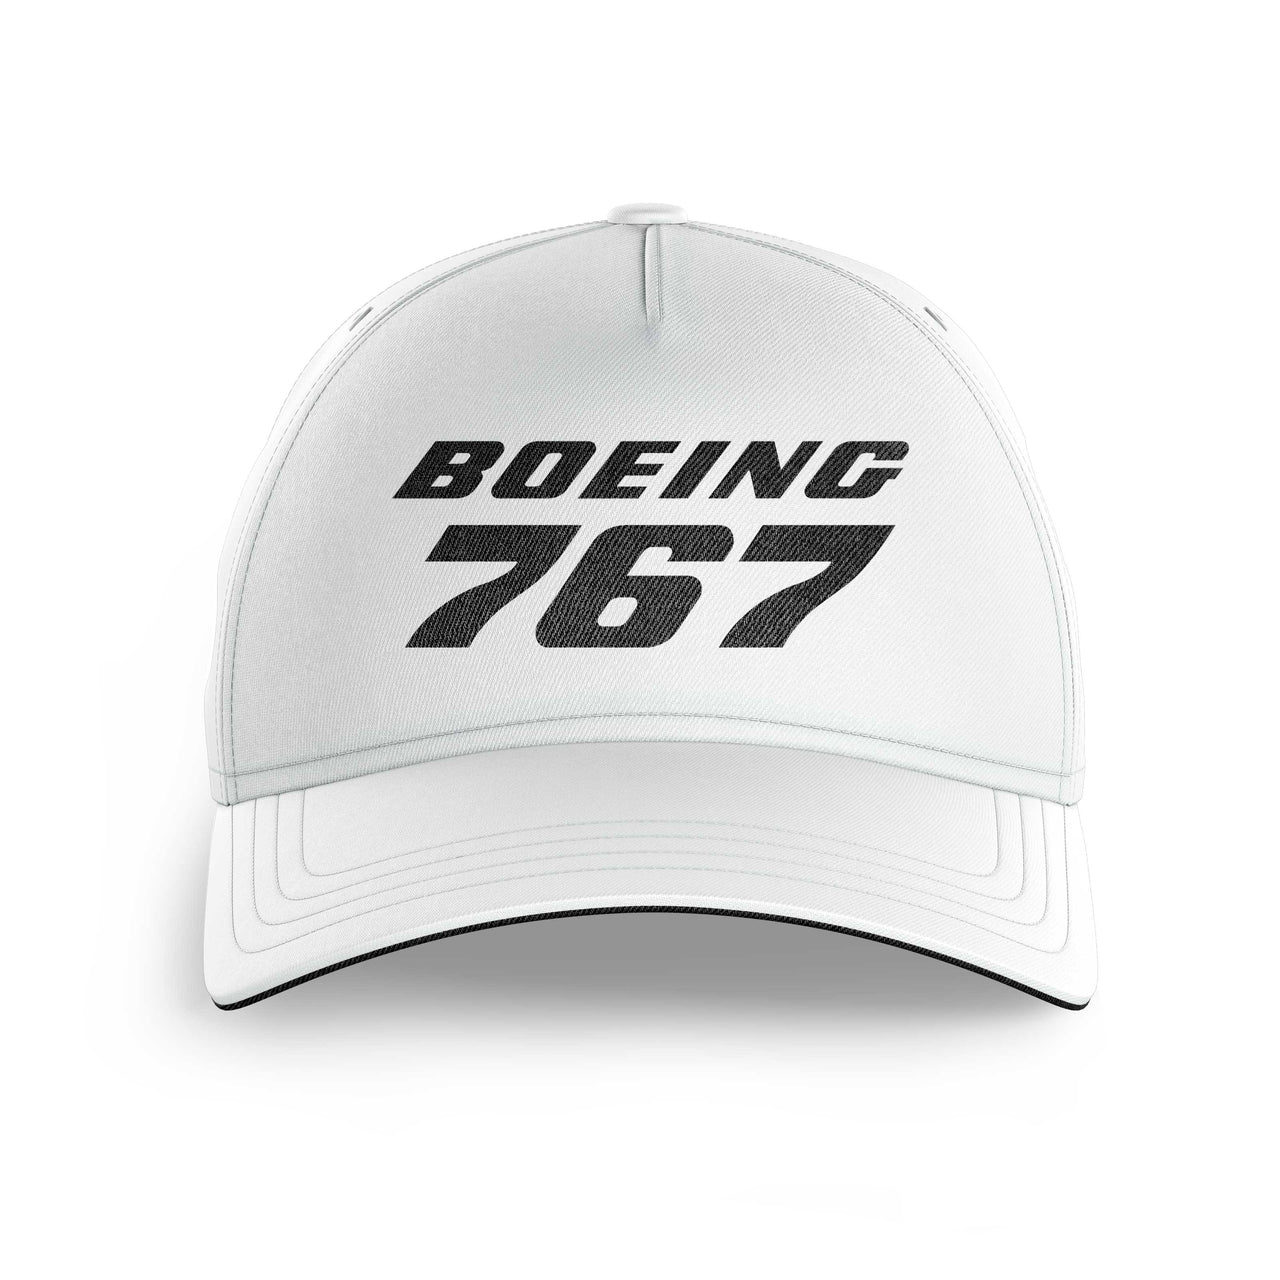 Boeing 767 & Text Printed Hats